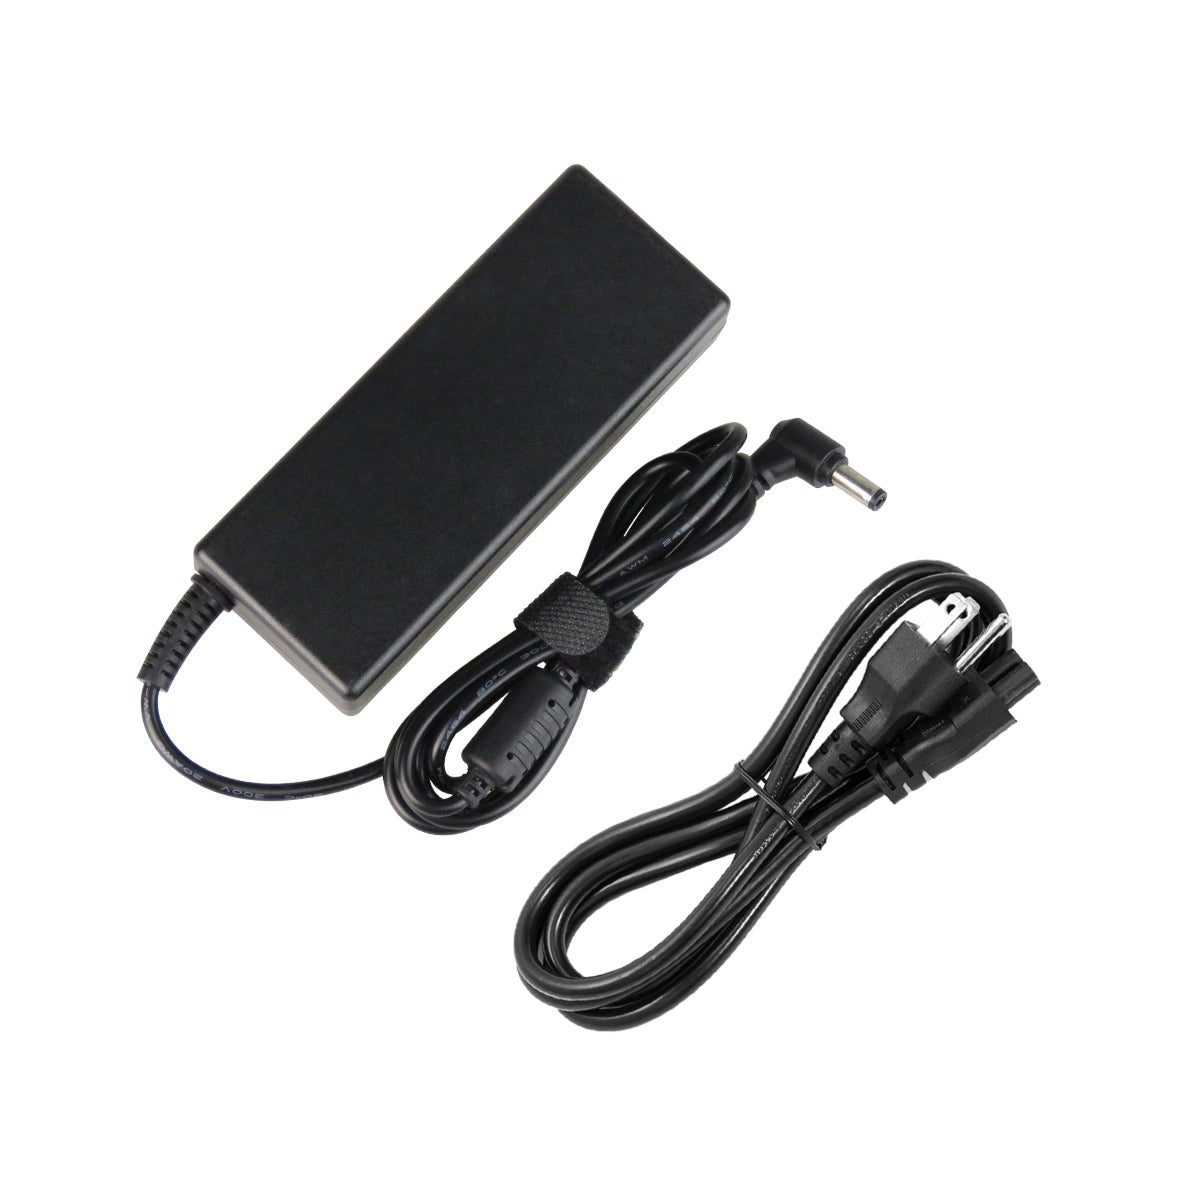 AC Adapter Charger for ASUS X57SV Notebook.